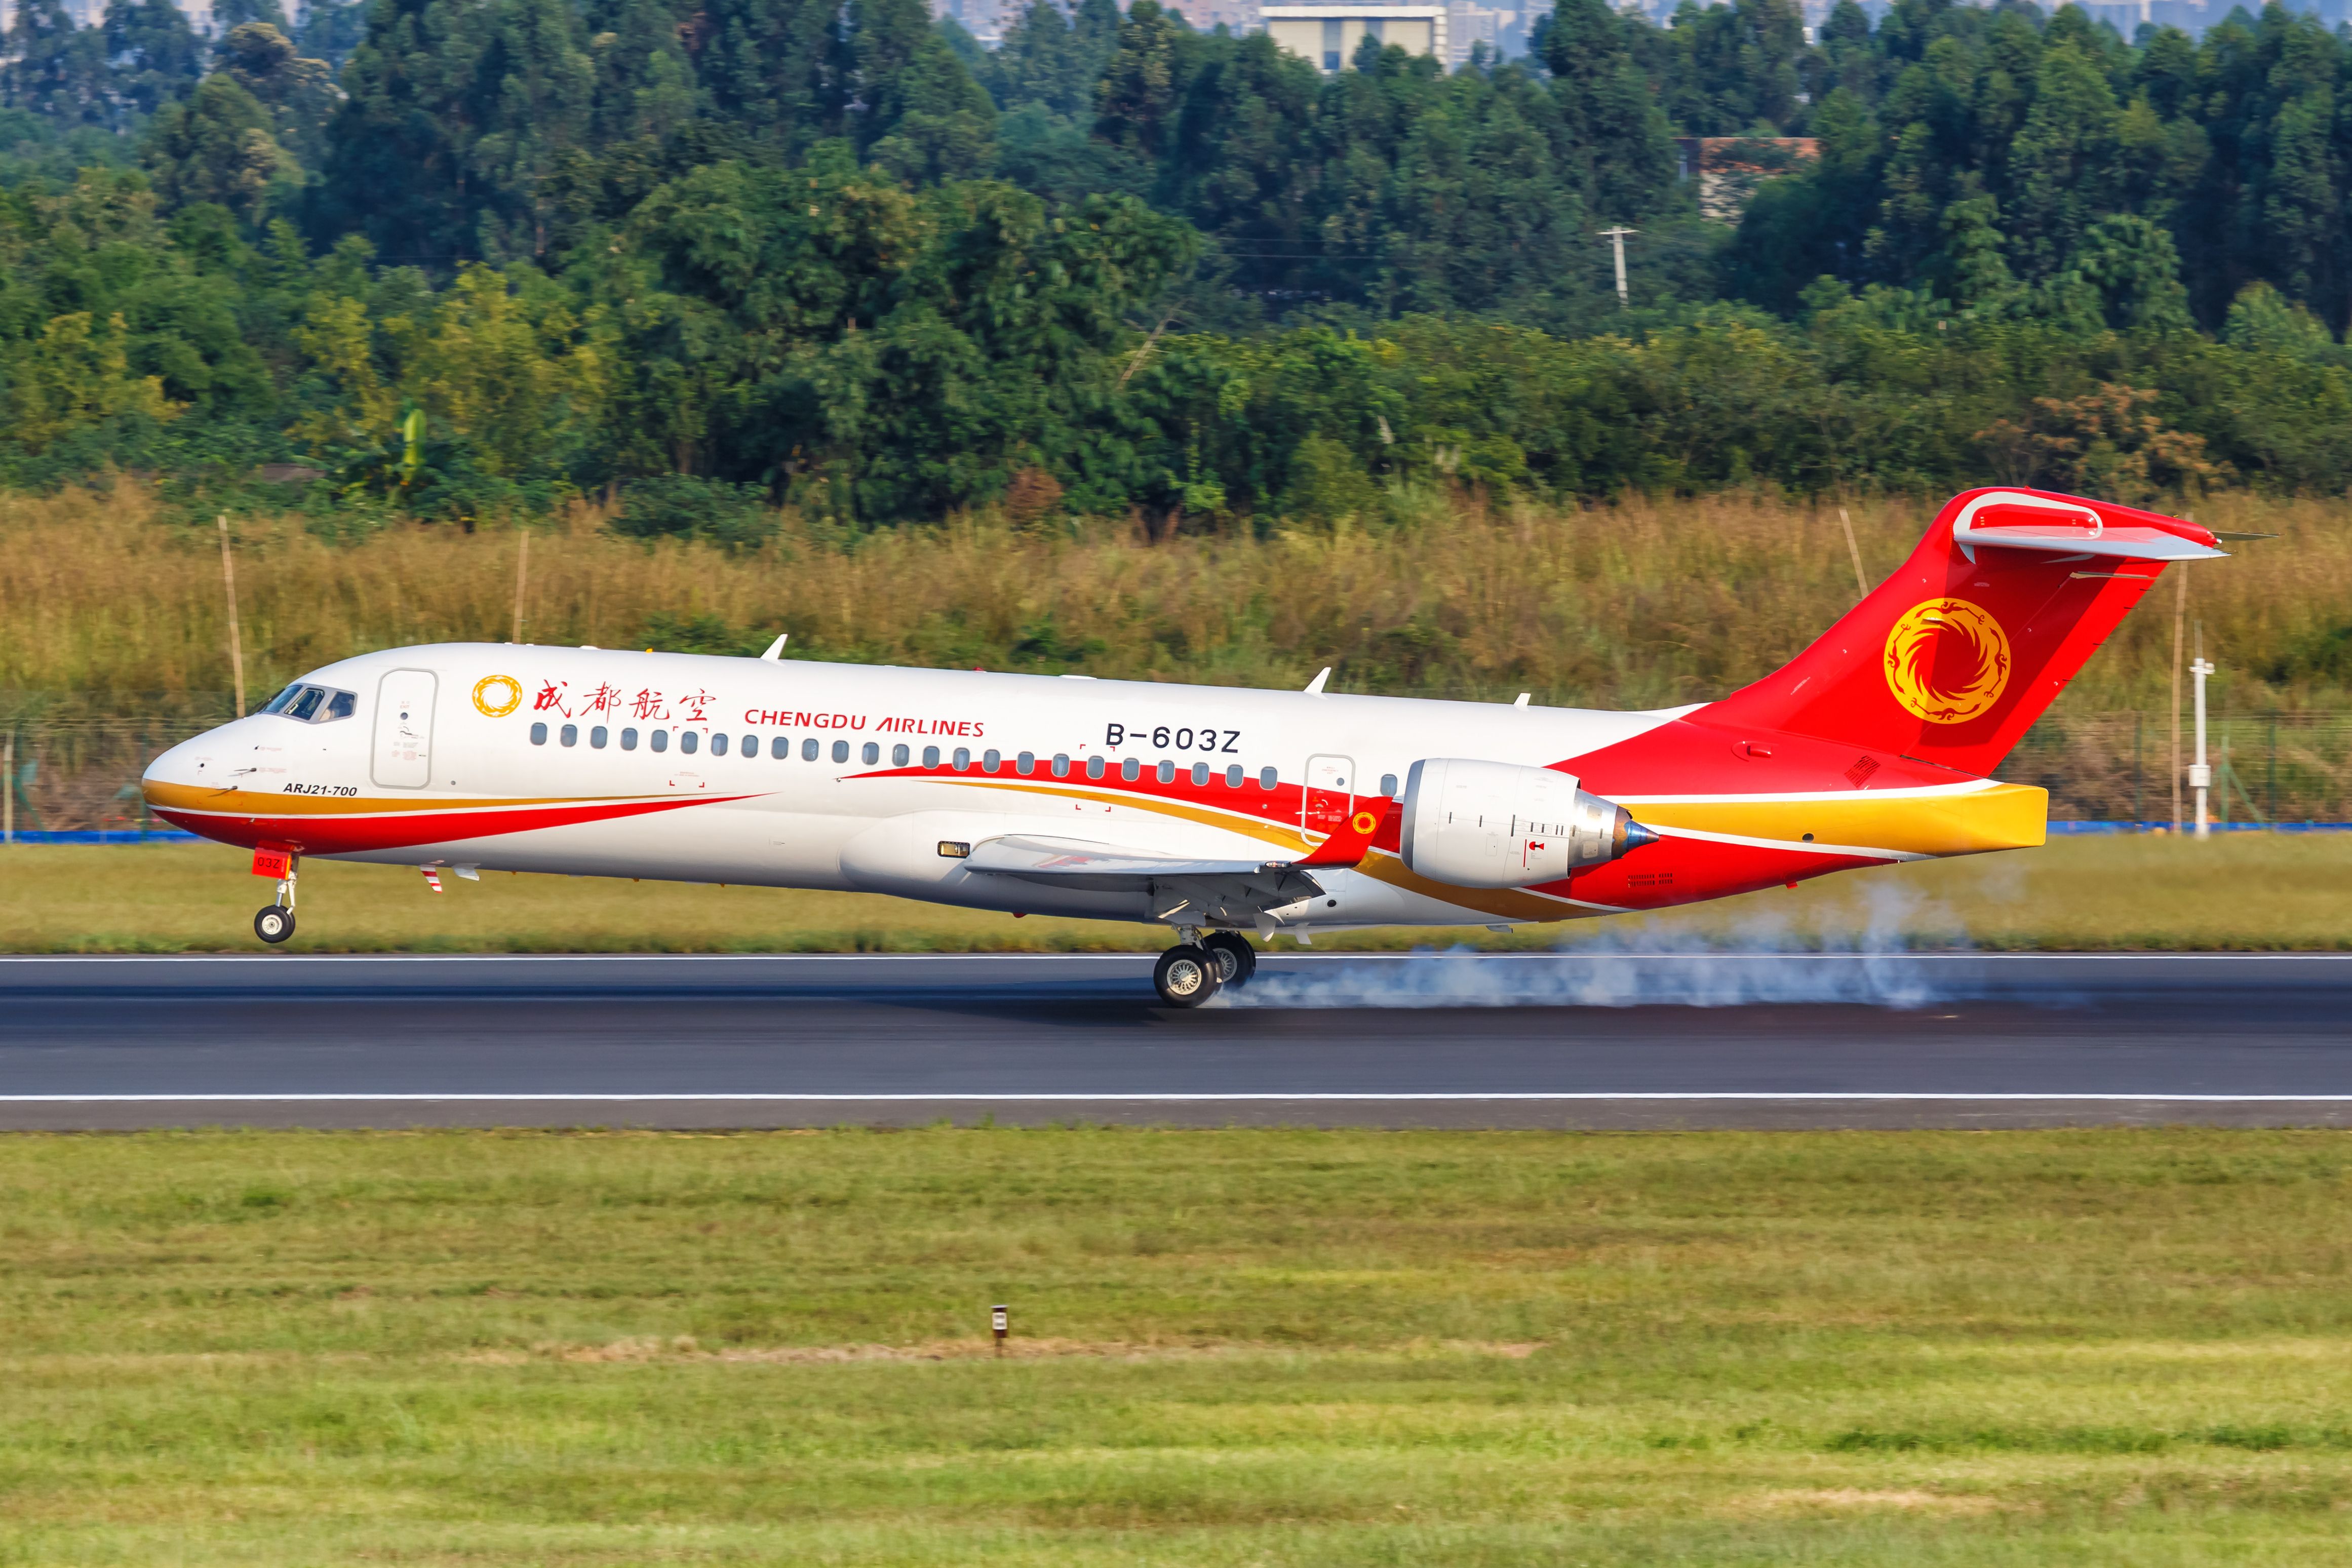 A Chengdu Airlines COMAC ARJ21-700 as it lands on the runway.